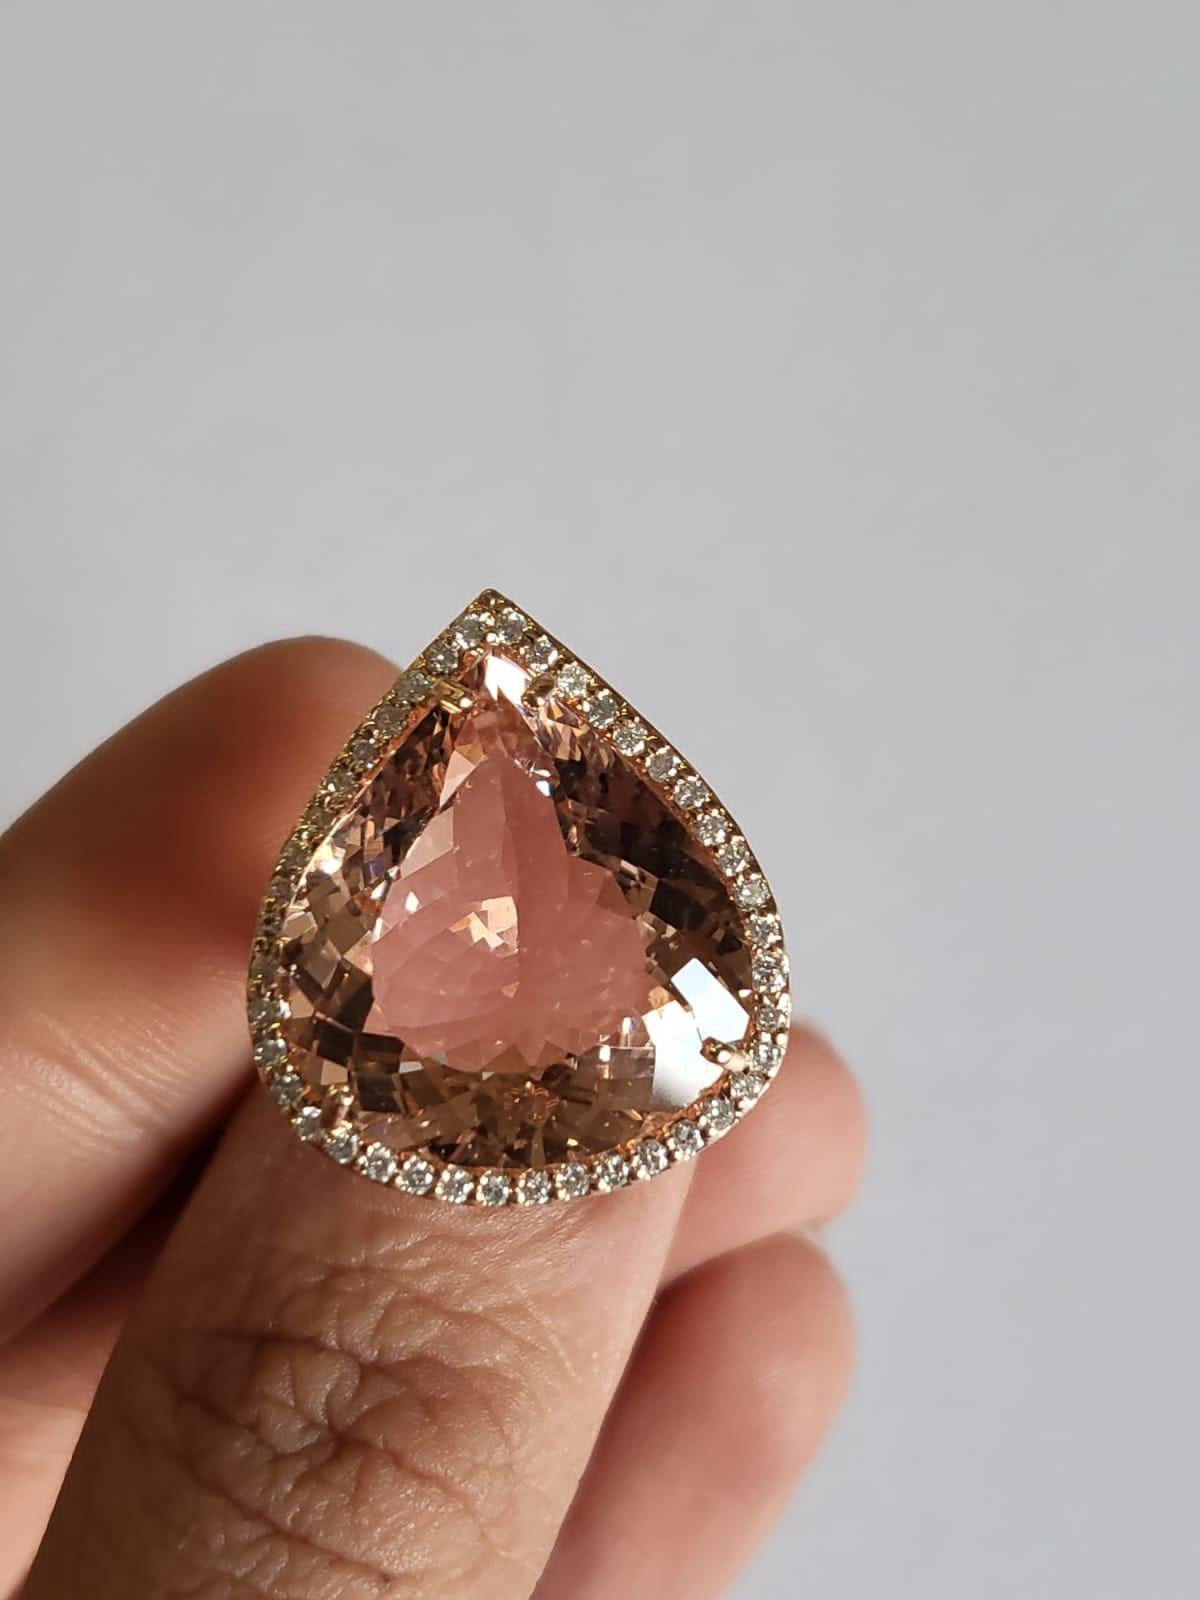 A very gorgeous and beautiful, Morganite Engagement / Cocktail Ring set in 18K Rose Gold & Diamonds. The weight of the Morganite is 16.21 carats. The weight of the Diamonds is 0.50 carats. Net Gold weight is 8.41 carats. The dimensions of the ring